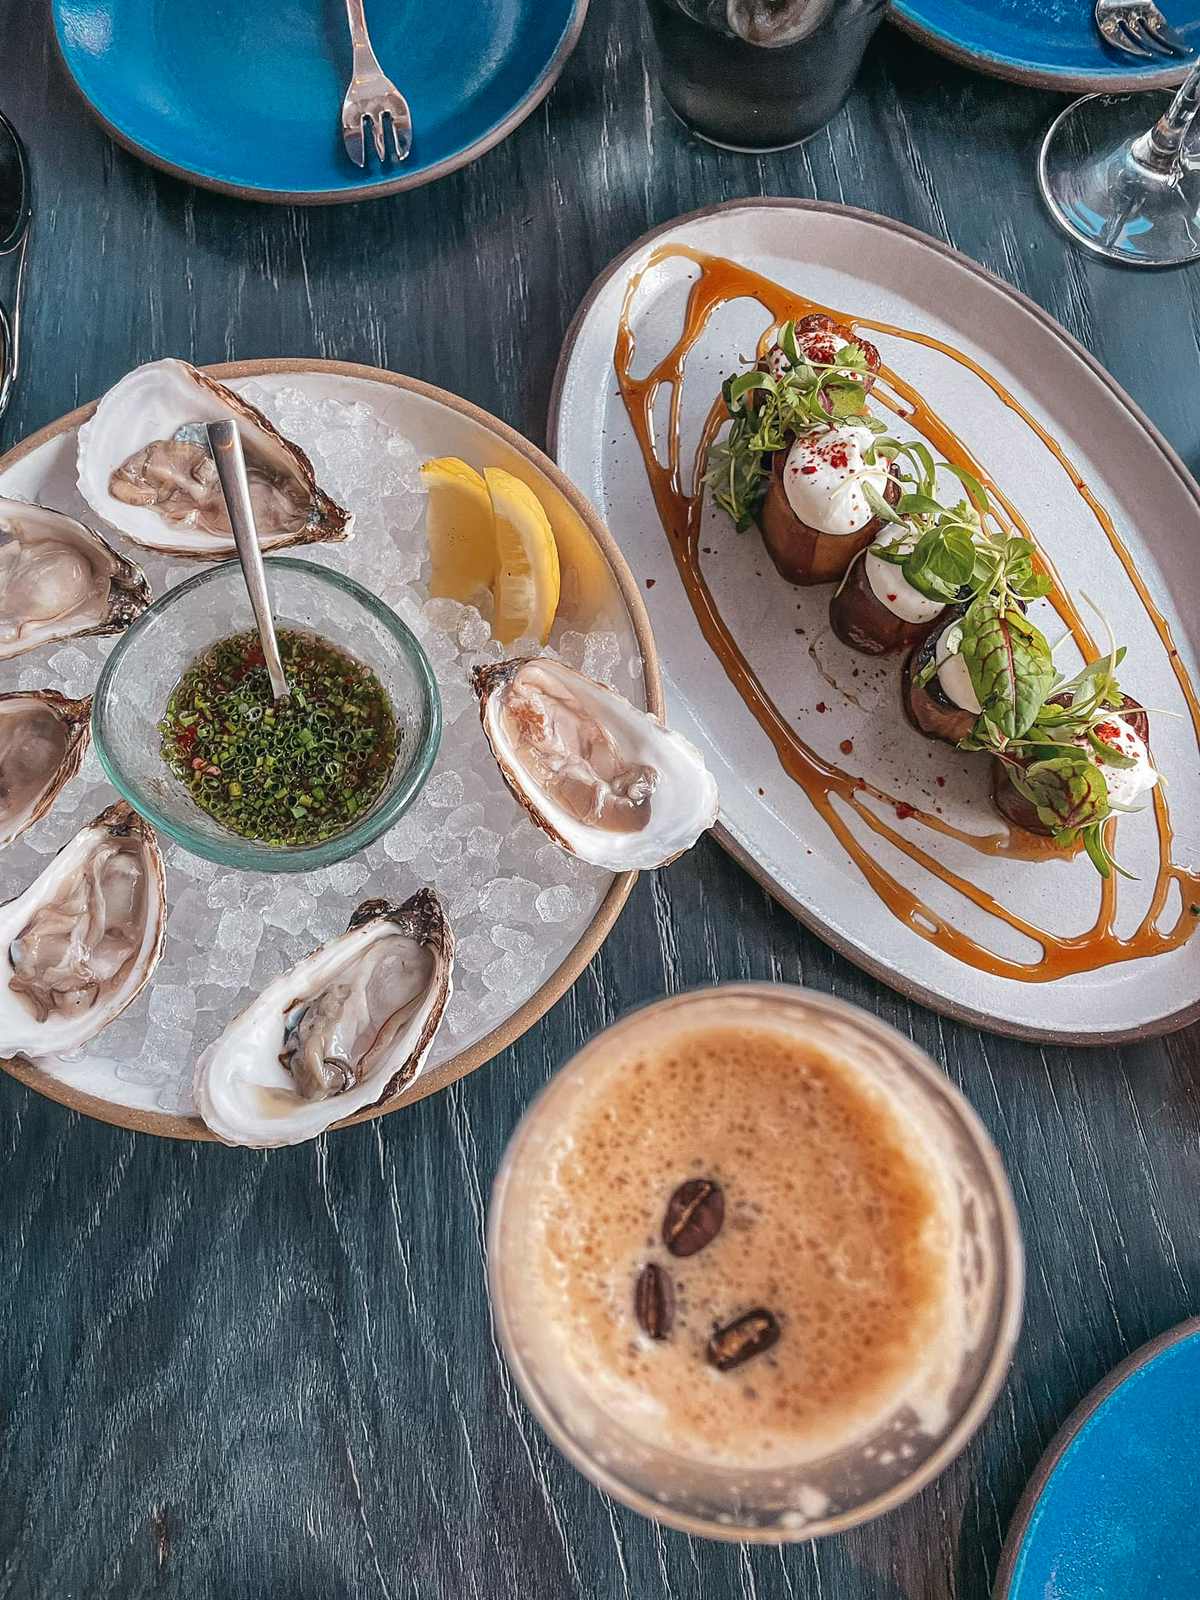 Eggplant, oysters, and an espresso martini from Electric Lemon, a restaurant in NYC